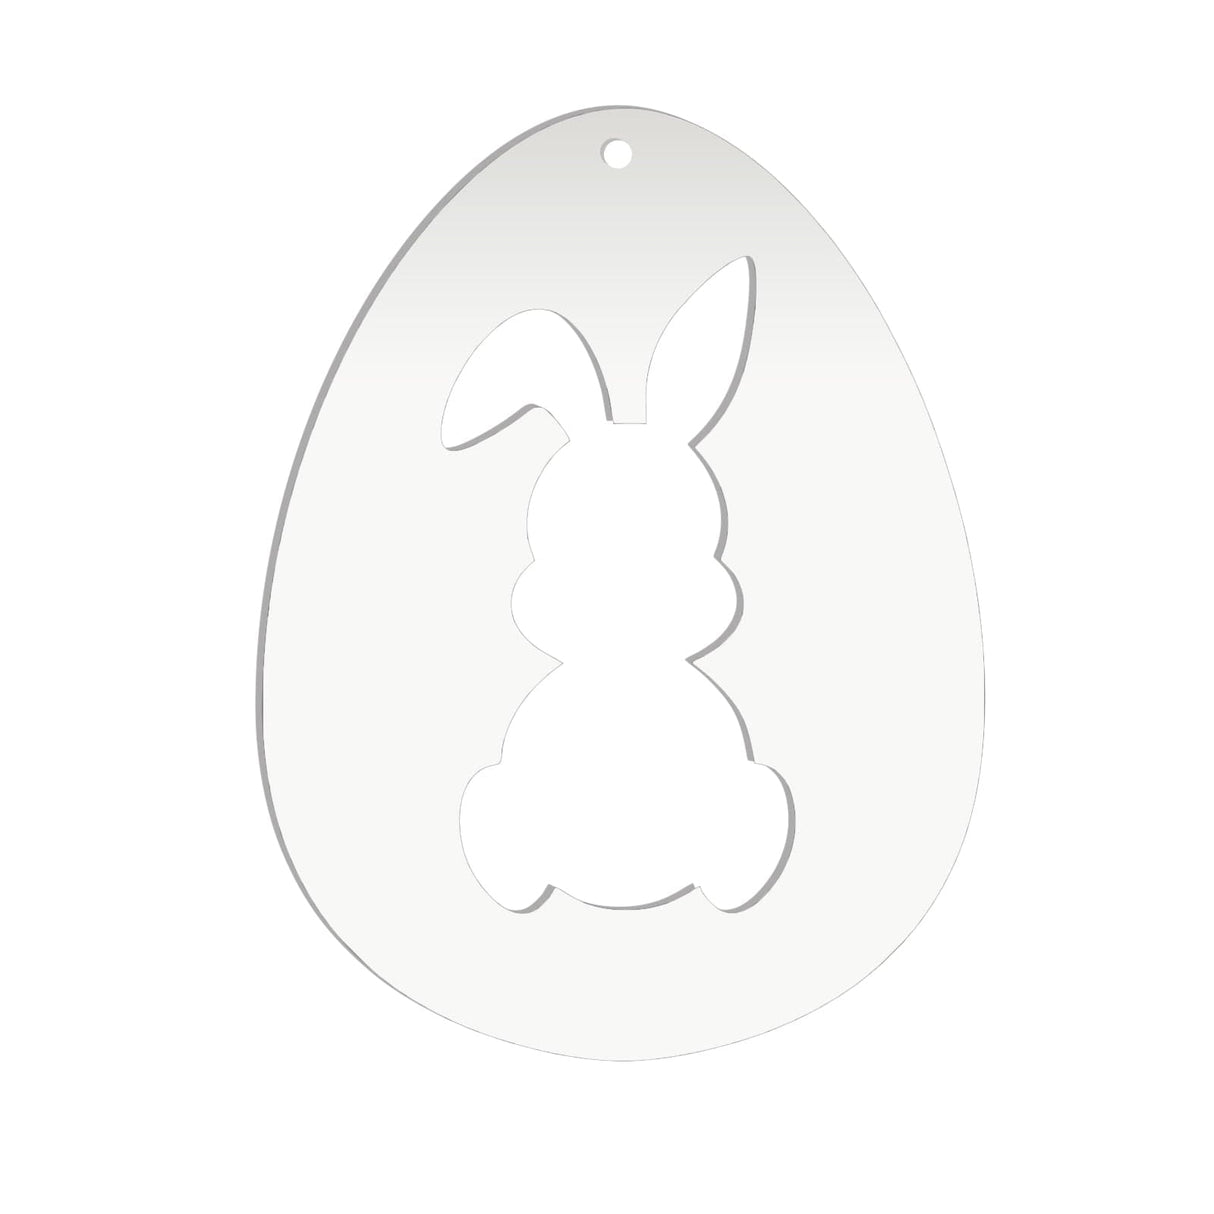 Laserworksuk craft eggs Acrylic Easter Egg With Bunny Cutout Blanks (8cm Pack of 6)